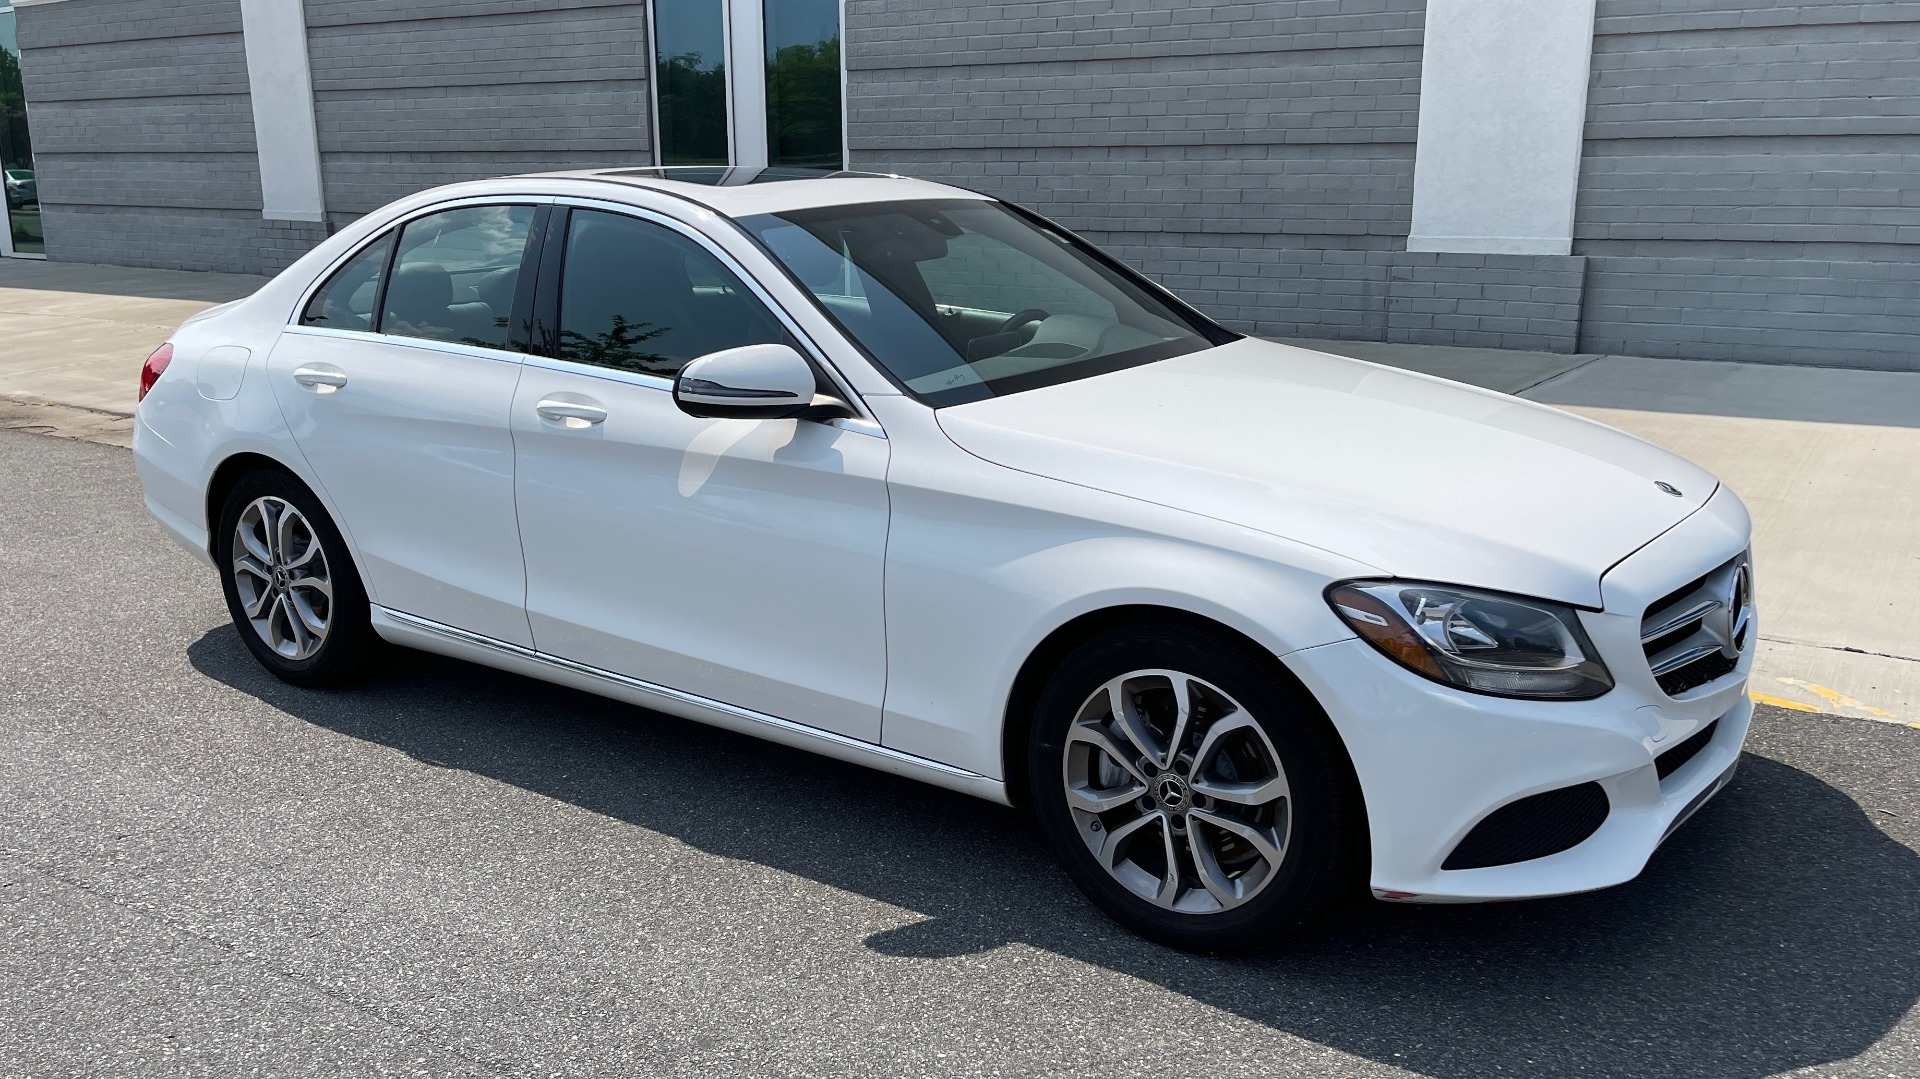 Used 2018 Mercedes-Benz C-CLASS C 300 / 2.0L / RWD / SUNROOF / APPLE~ANDROID / REARVIEW for sale Sold at Formula Imports in Charlotte NC 28227 6